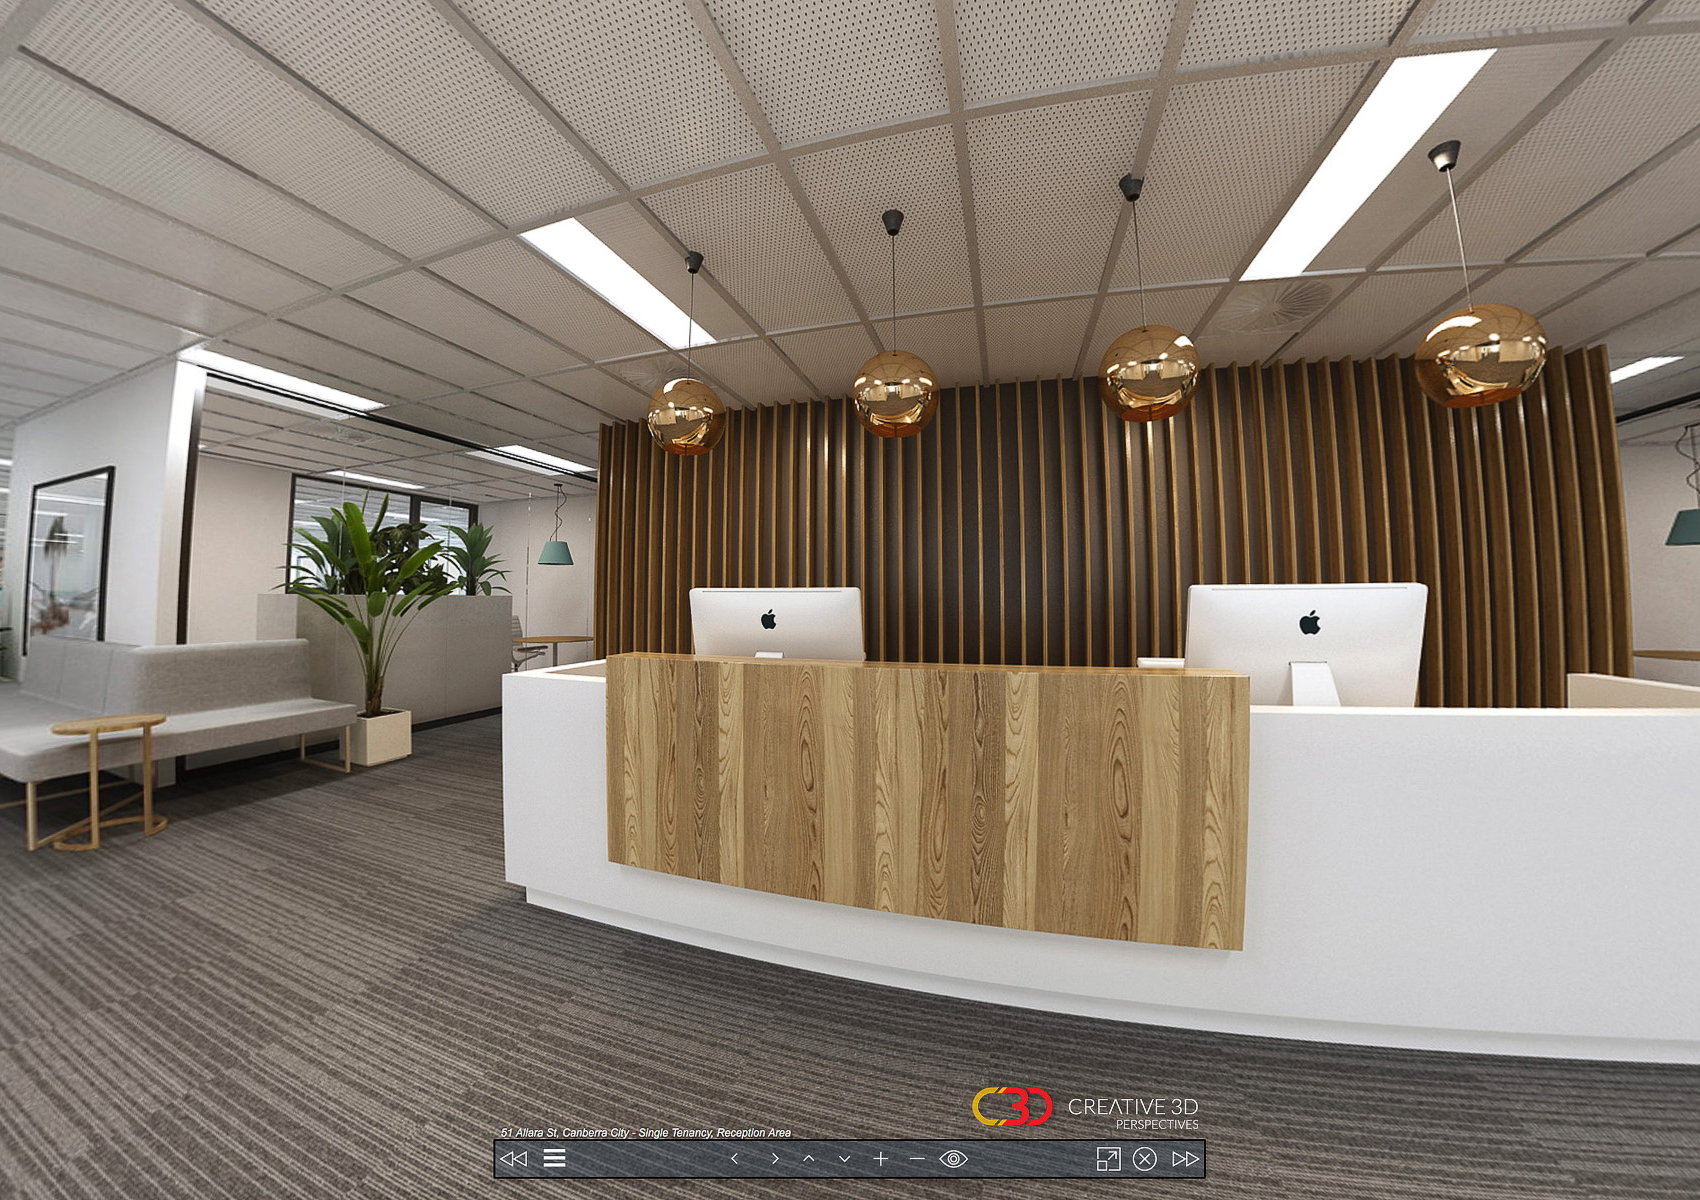 Modern classic reception desk in white & timber: Creative 3D Perspectives interior office virtual tour